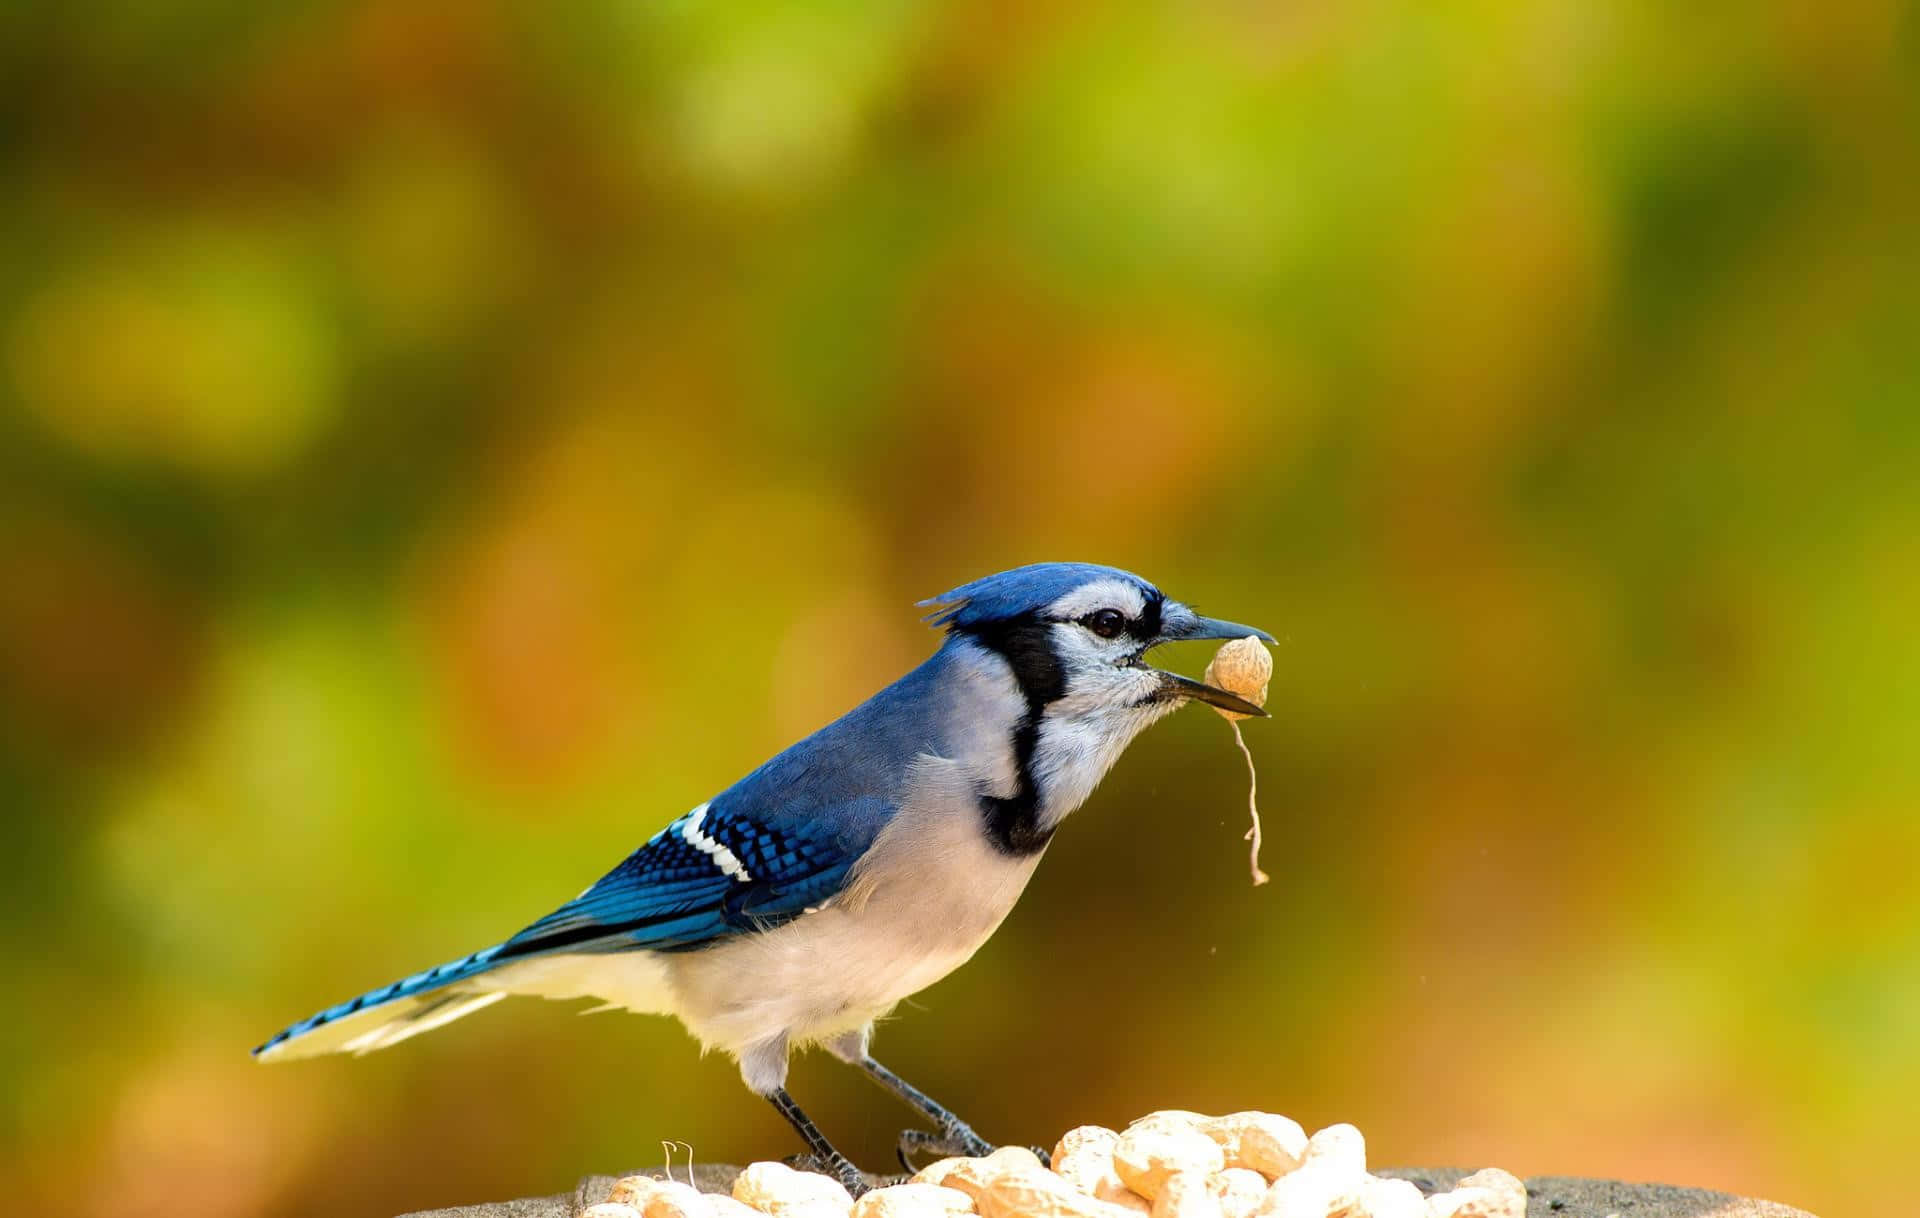 A Blue Jay perched atop a branch in its natural habitat